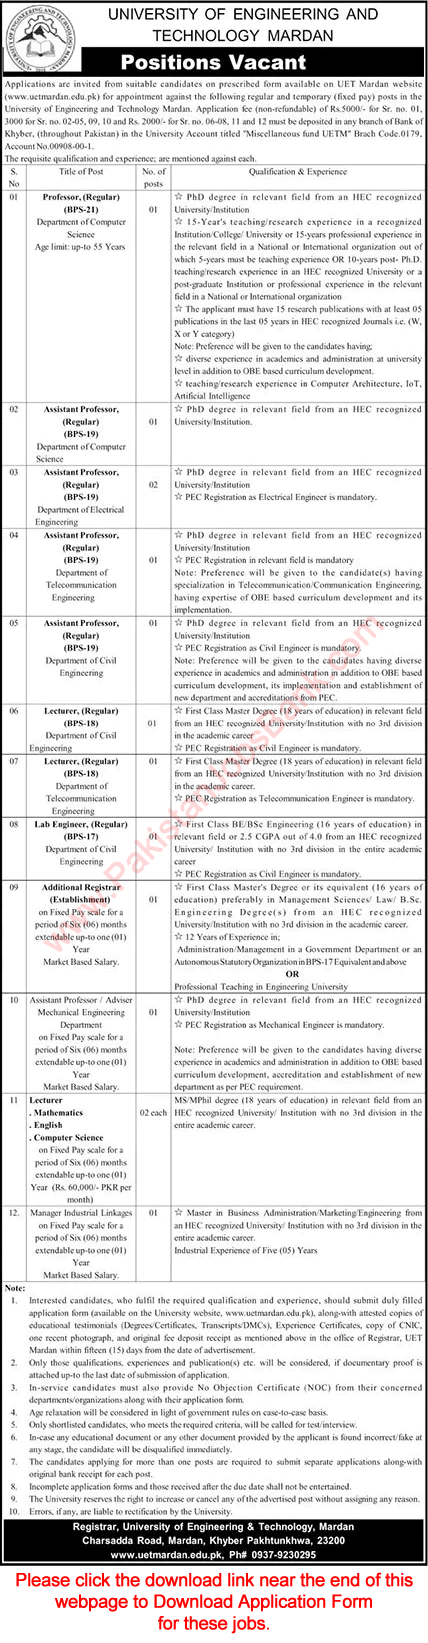 UET Mardan Jobs August 2021 Application Form Teaching Faculty & Others University of Engineering and Technology Latest